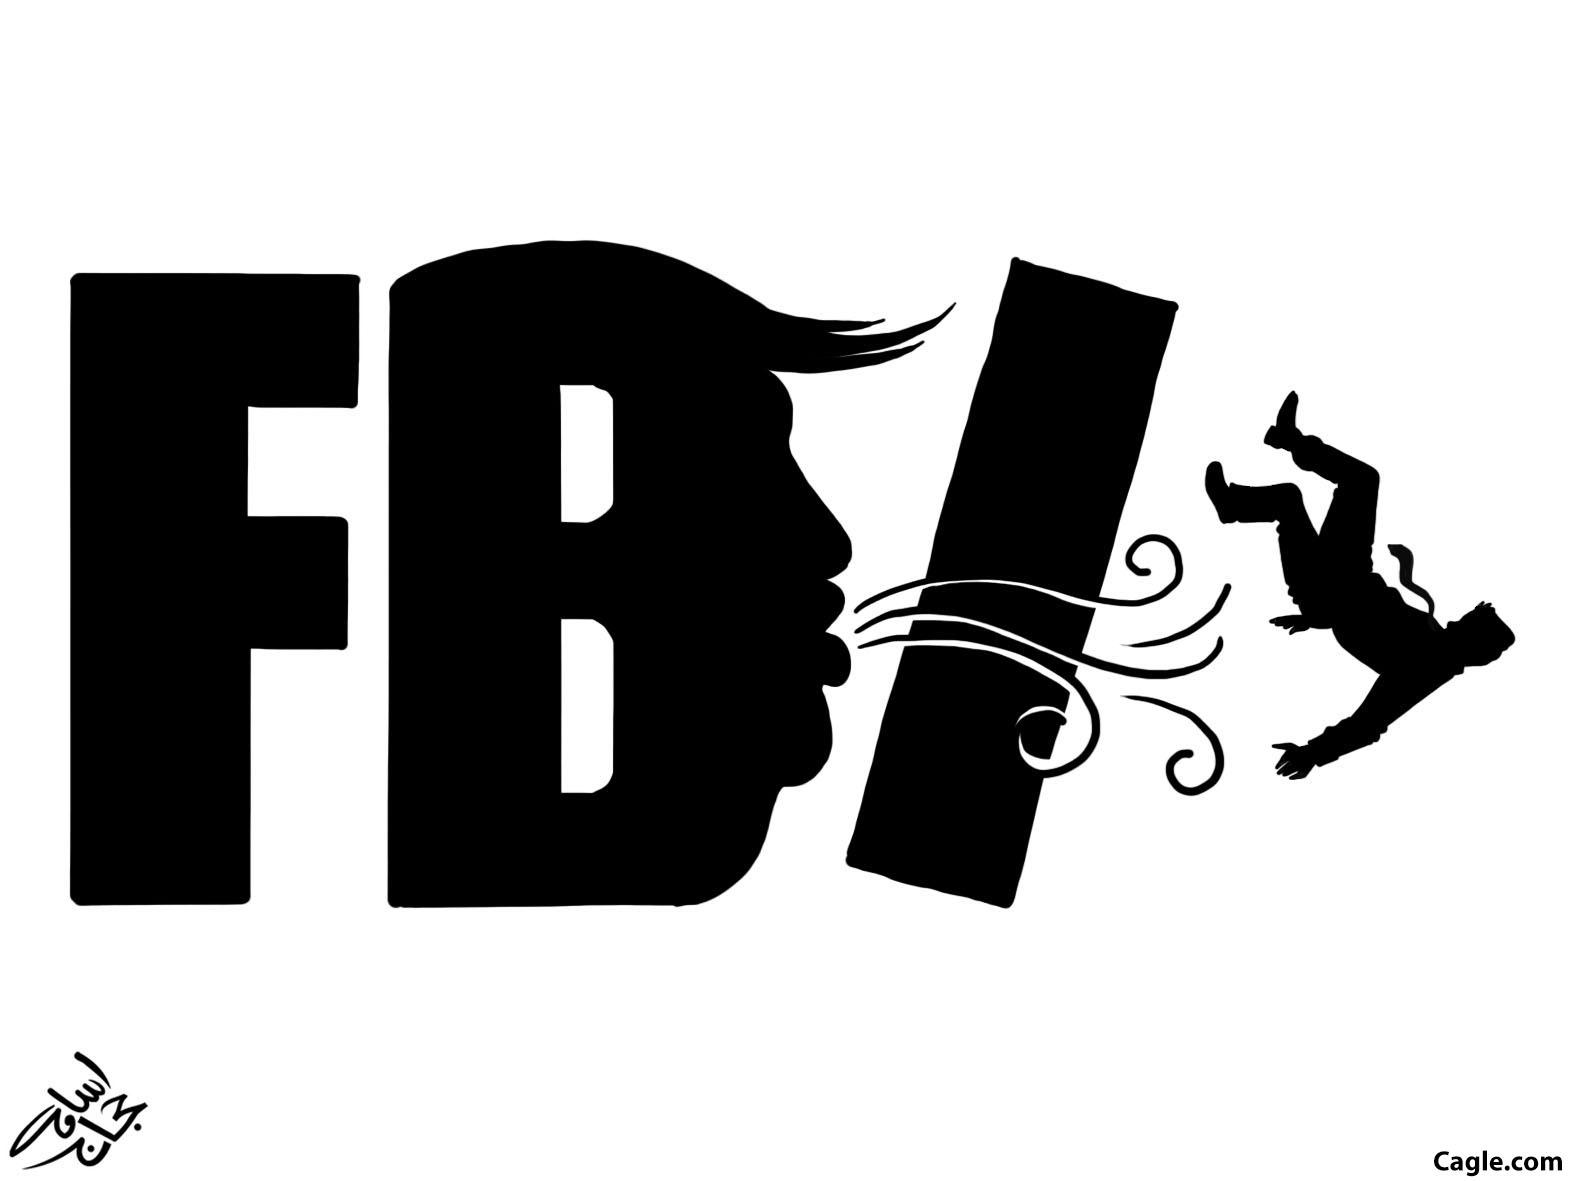 The letter FBI drawn with B the profile of Trump and it's blowing away the I, as in information